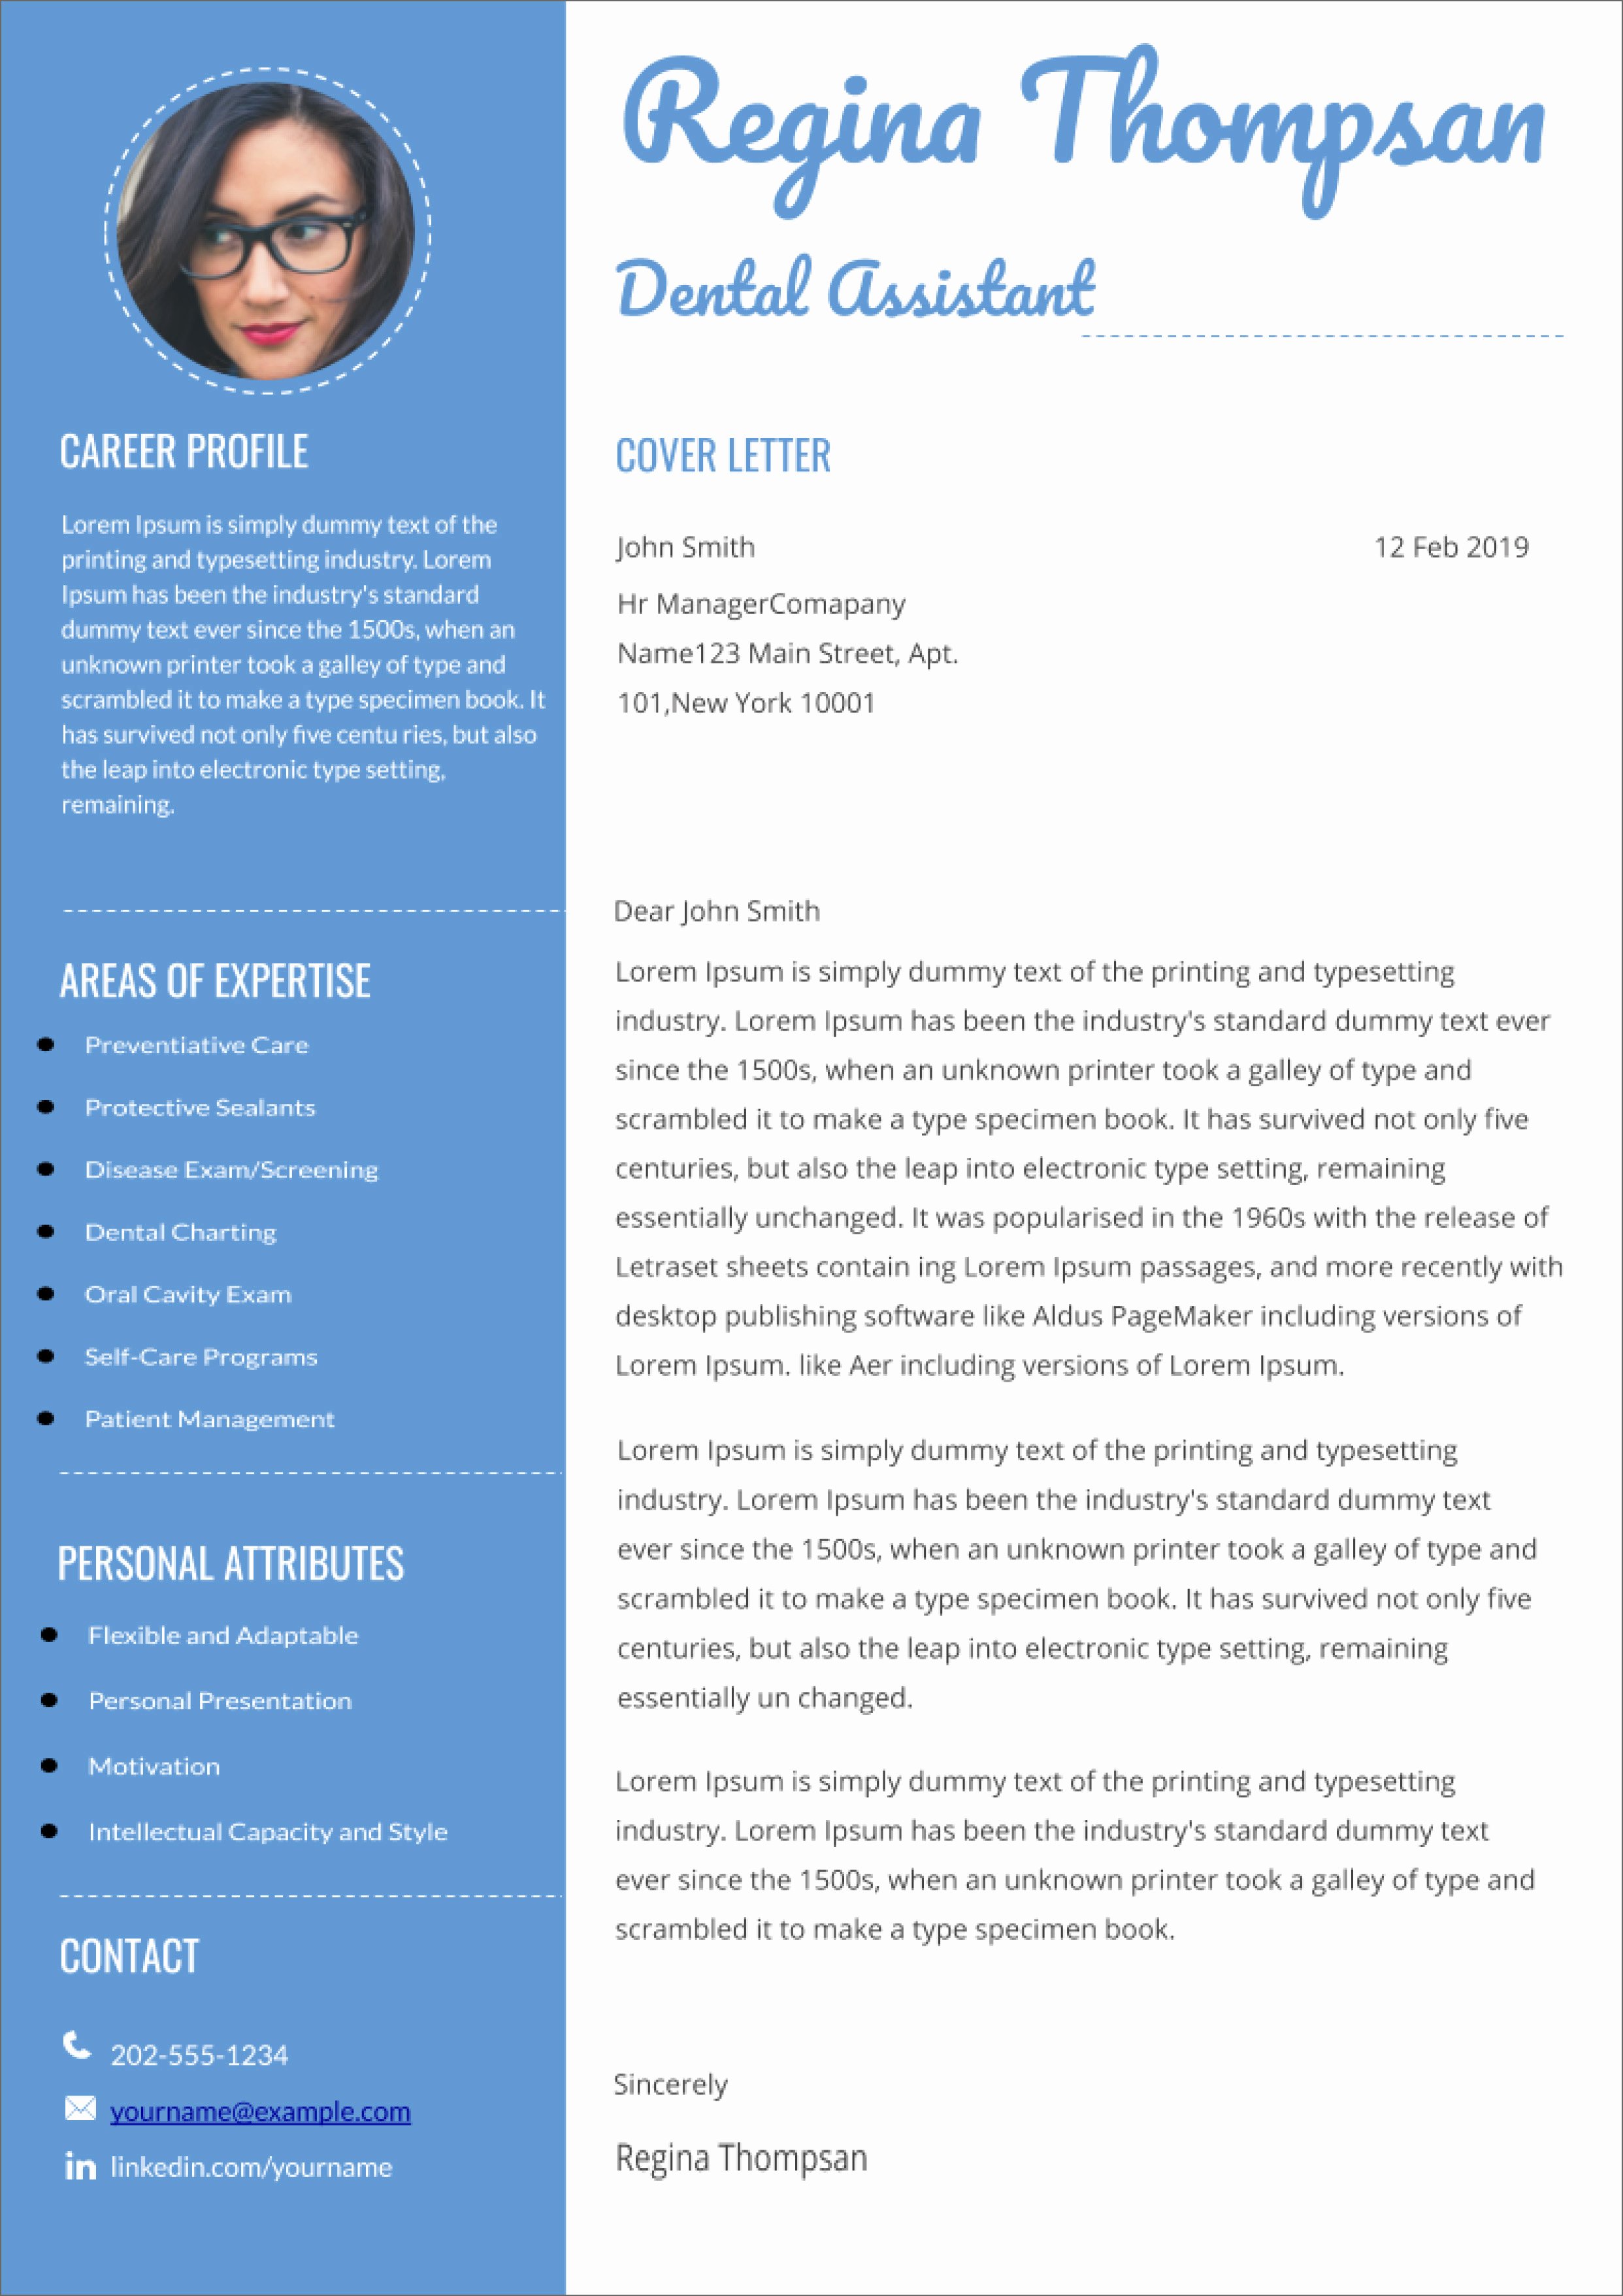 Letter Template Google Docs Best Of 13 Free Cover Letter Templates for Microsoft Word Docx and